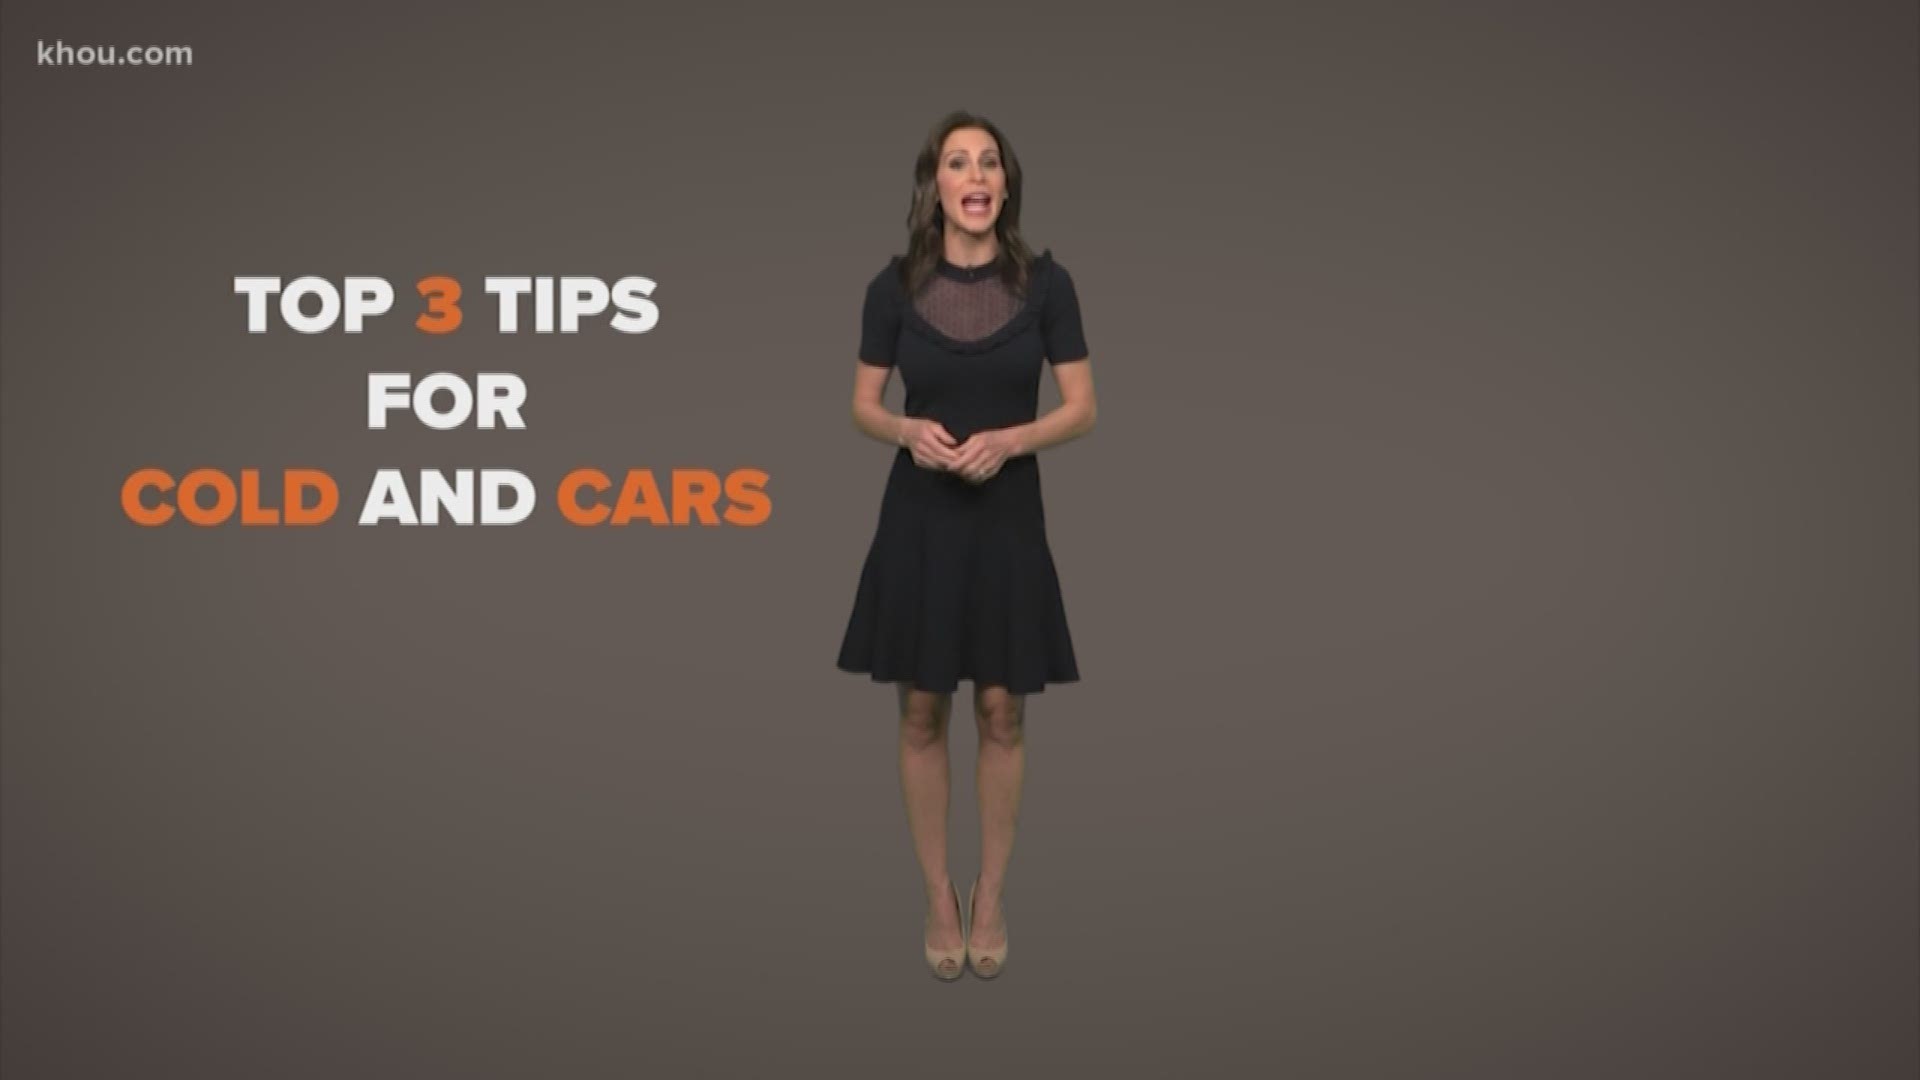 These colder temperatures aren't just a shock to our system. It's also a tough adjustment for our cars. Steph Simmons has some tips to get you on the road.